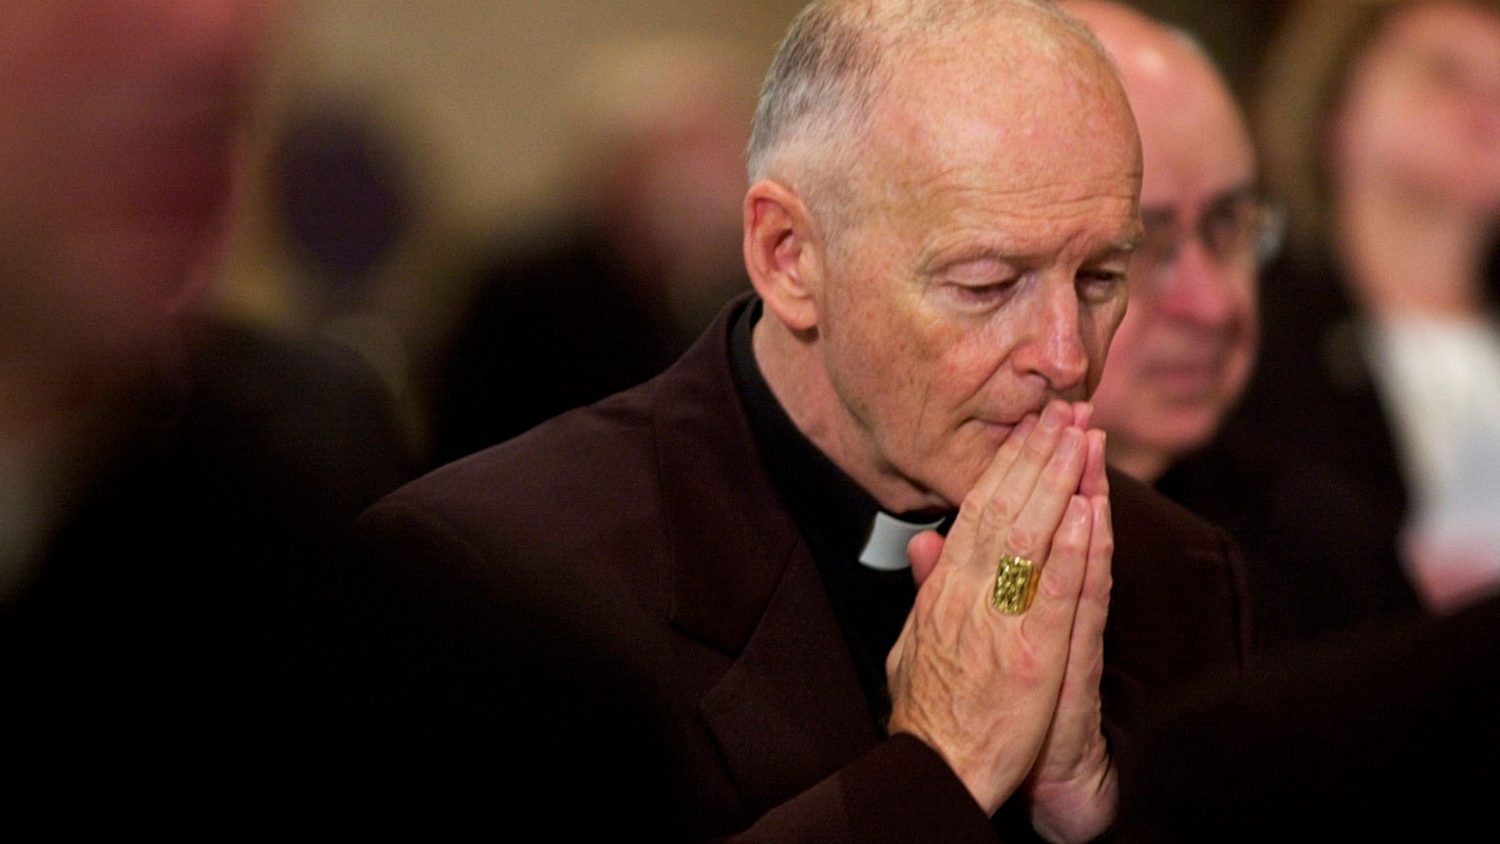 USA: Former Cardinal McCarrick charged with sexual assault